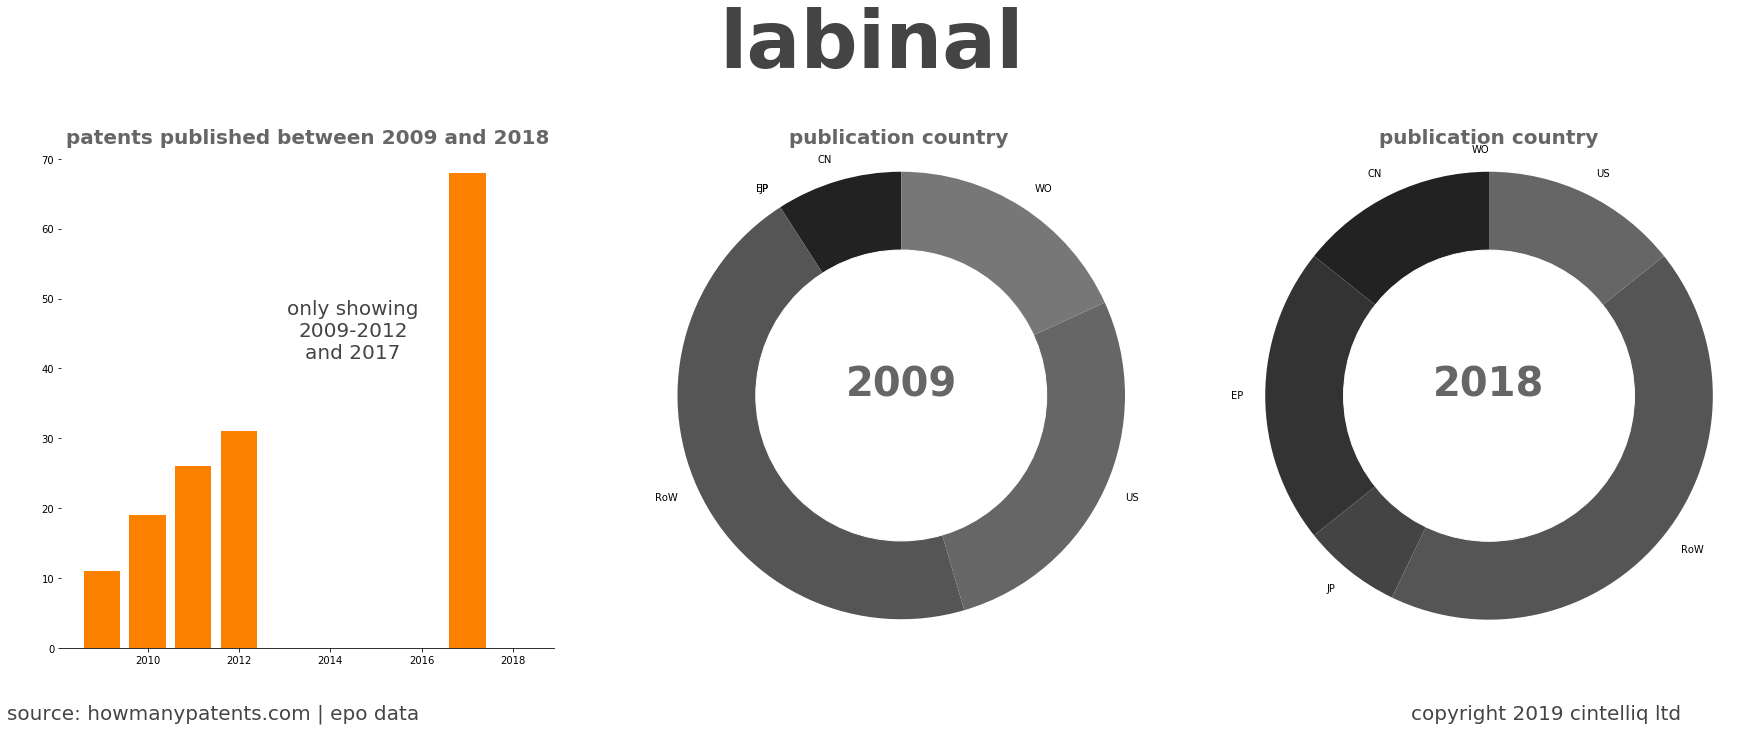 summary of patents for Labinal